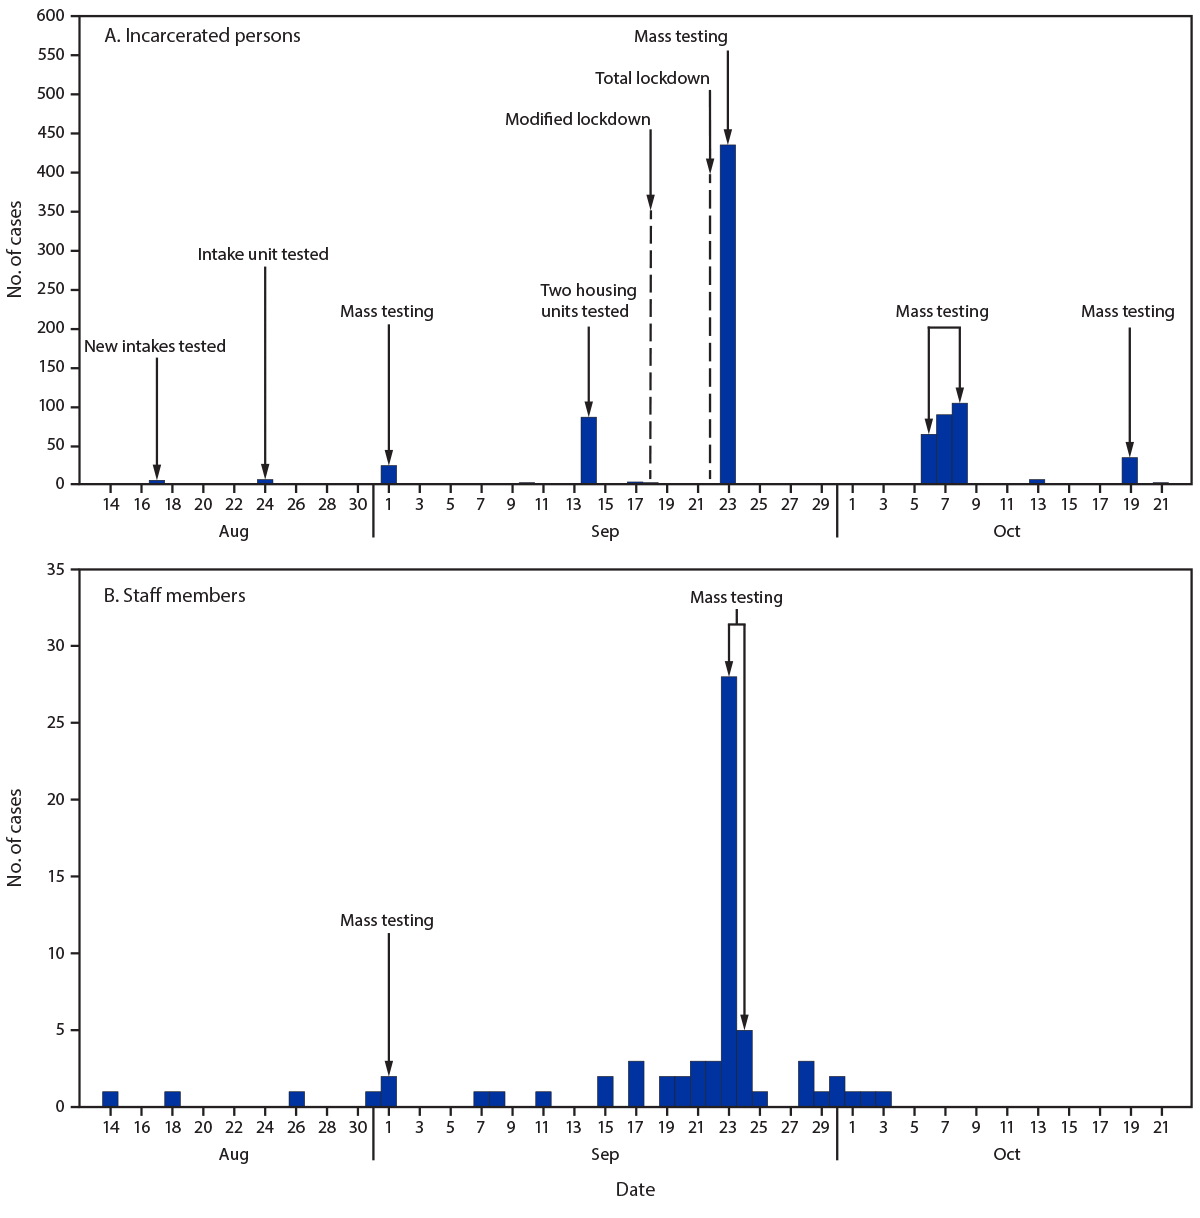 The figure is a pair of histograms, epidemiologic curves that show the number of COVID-19 cases among incarcerated persons and staff members in prison A, Wisconsin, by testing date during August 14–October 22, 2020.